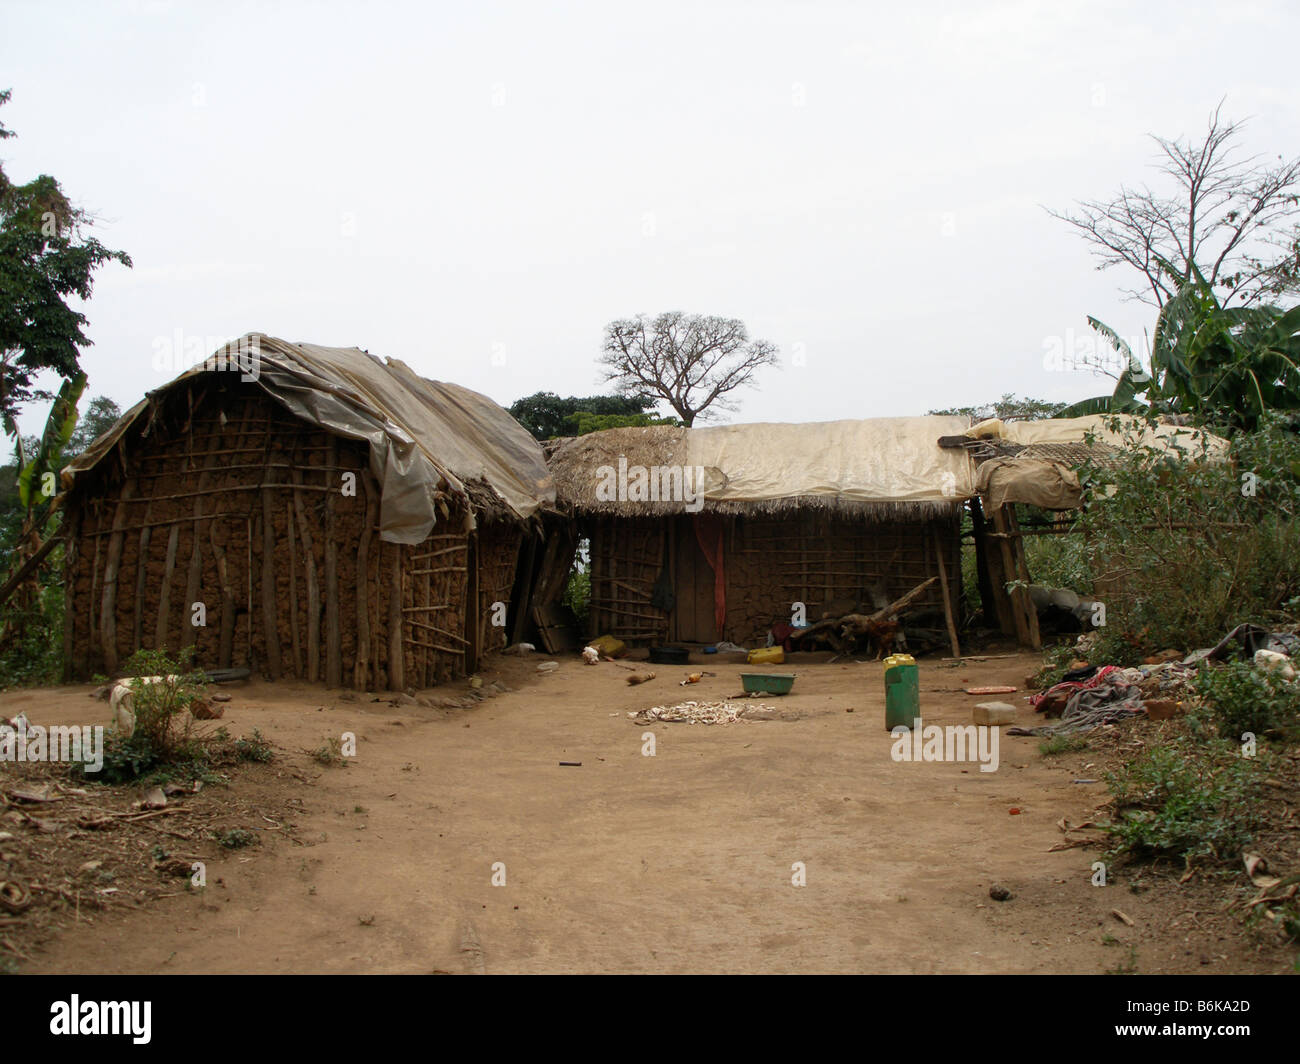 Typical low income rural mud and wattle housing in Uganda Stock Photo